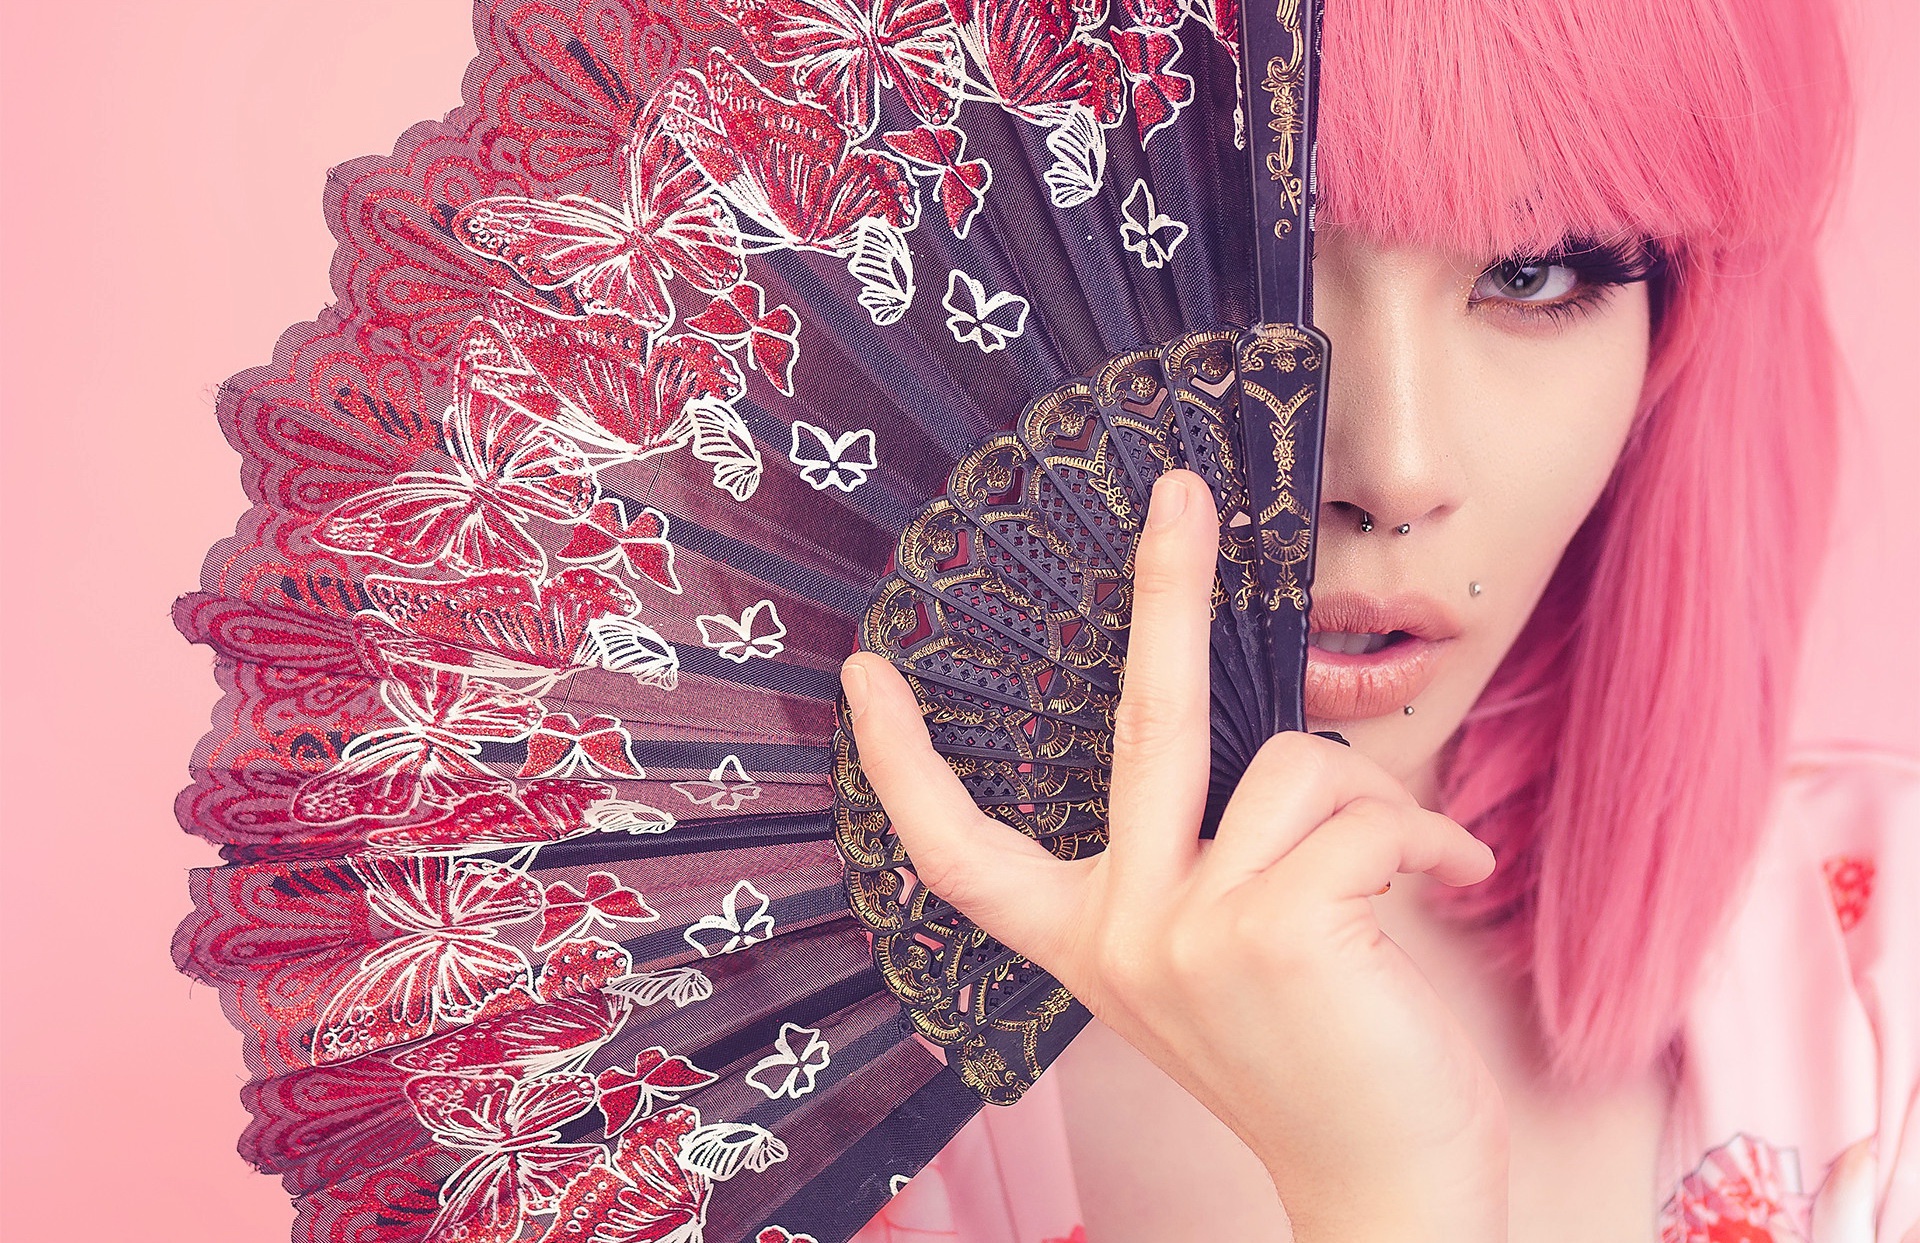 People 1920x1243 dyed hair pink hair Asian face women model